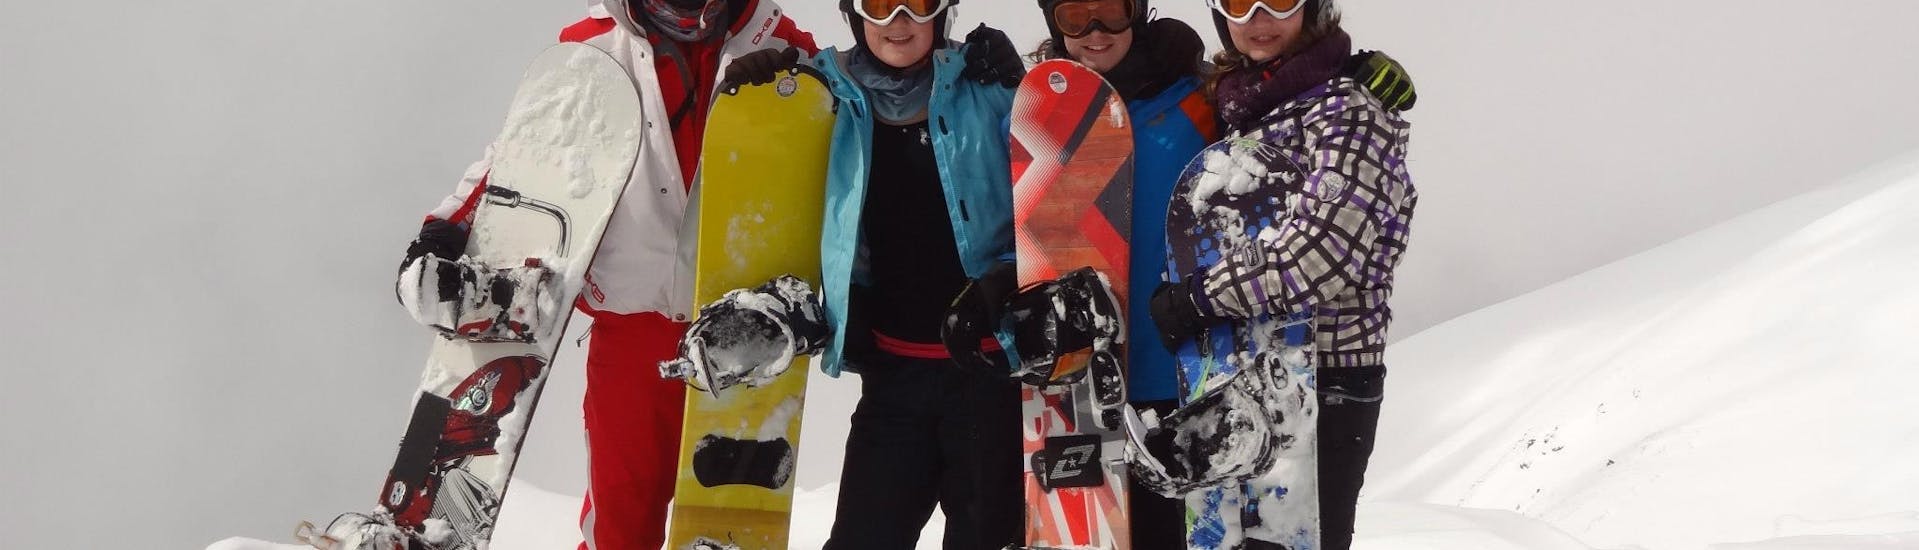 Snowboarding Lessons (from 8 y.) for Beginners with Ski School Speikboden Ahrntal - Hero image